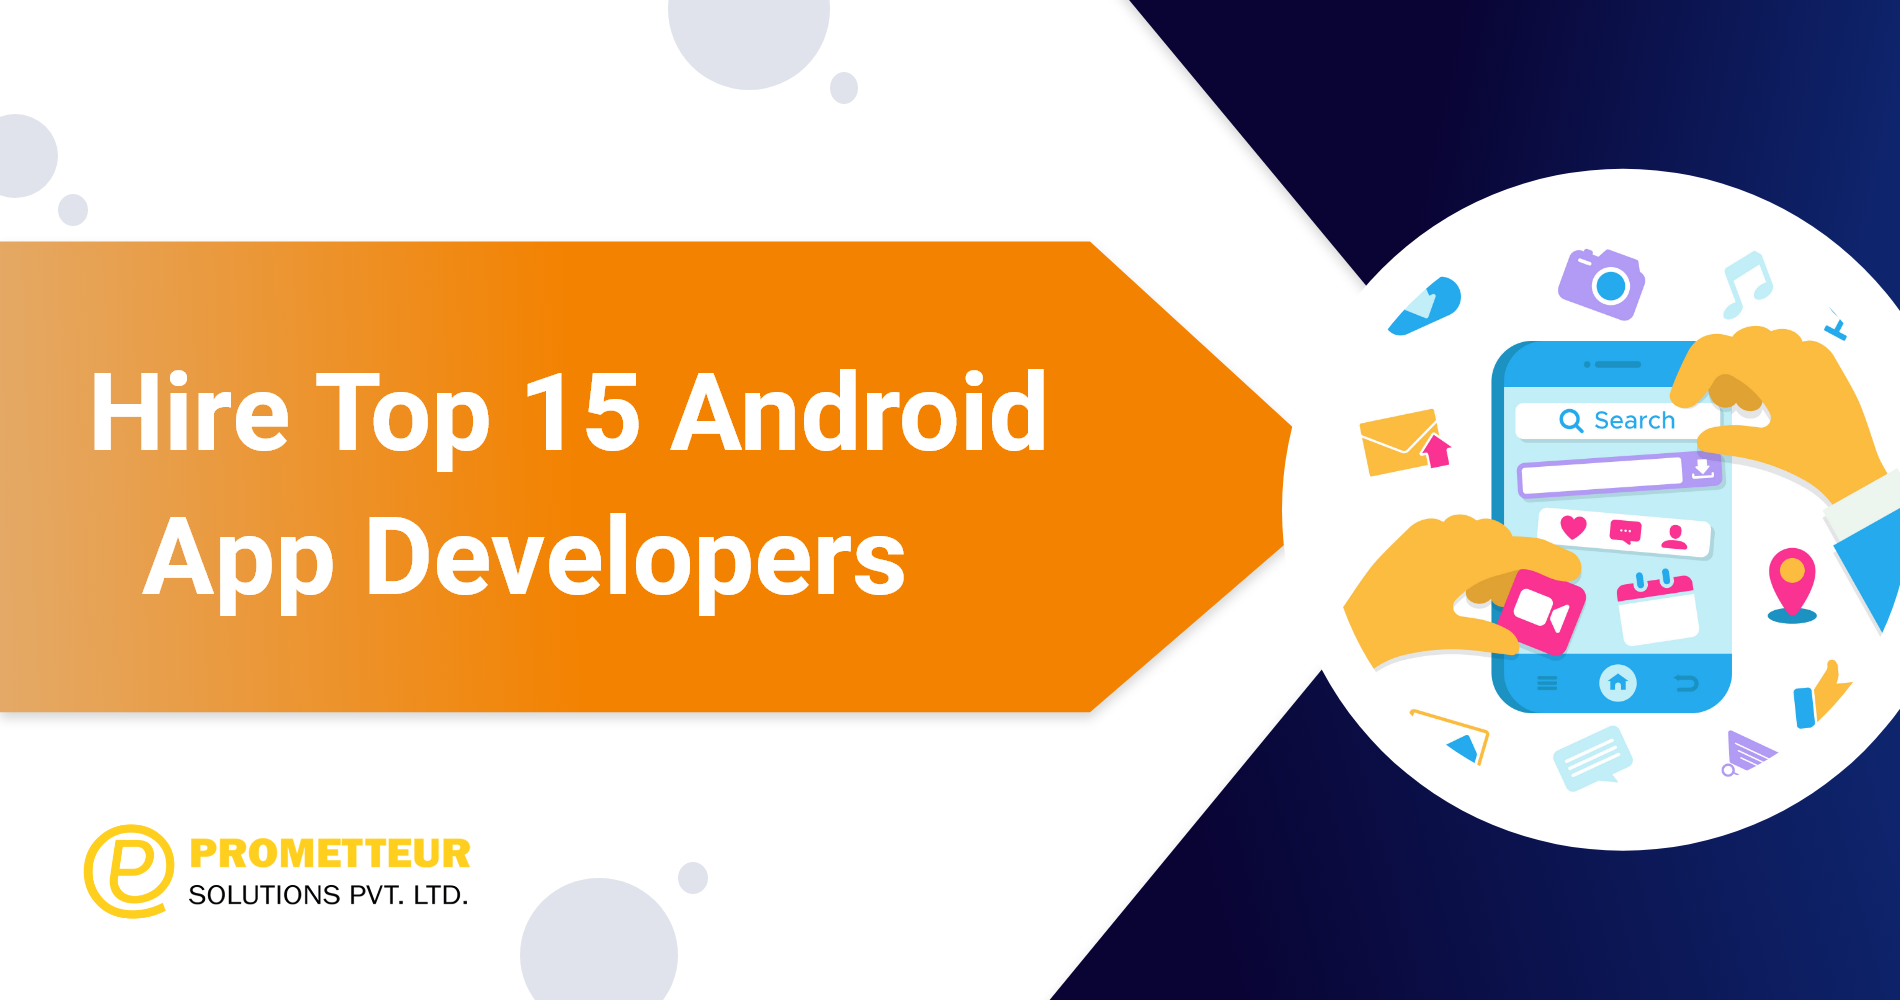 Hire Top 15 Android App Developers